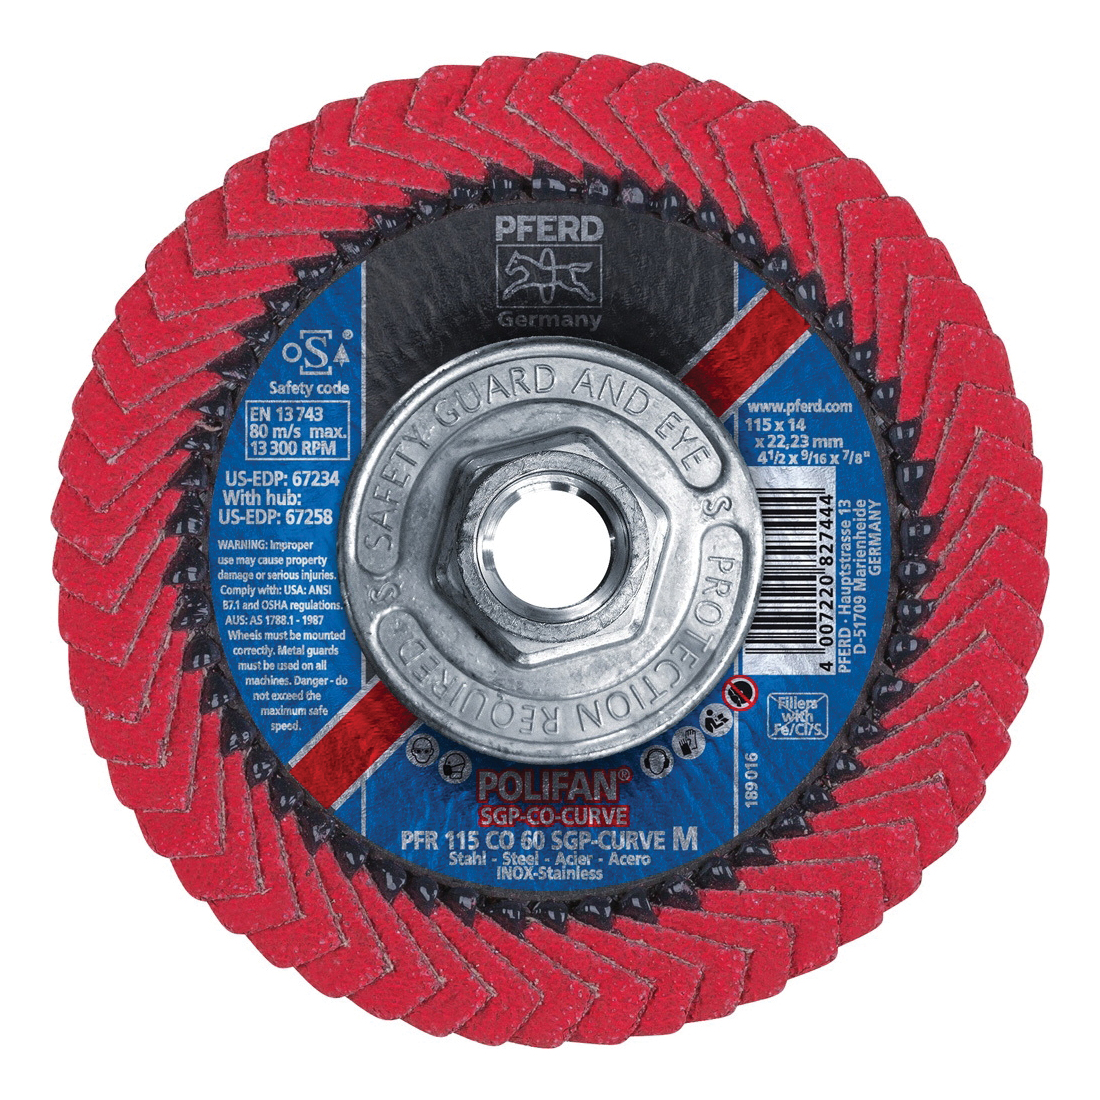 PFERD Polifan® 67258 Special Line SGP CO-CURVE Threaded Coated Abrasive Flap Disc, 4-1/2 in Dia, 60 Grit, Ceramic Oxide Abrasive, Type PFR/Radial Disc